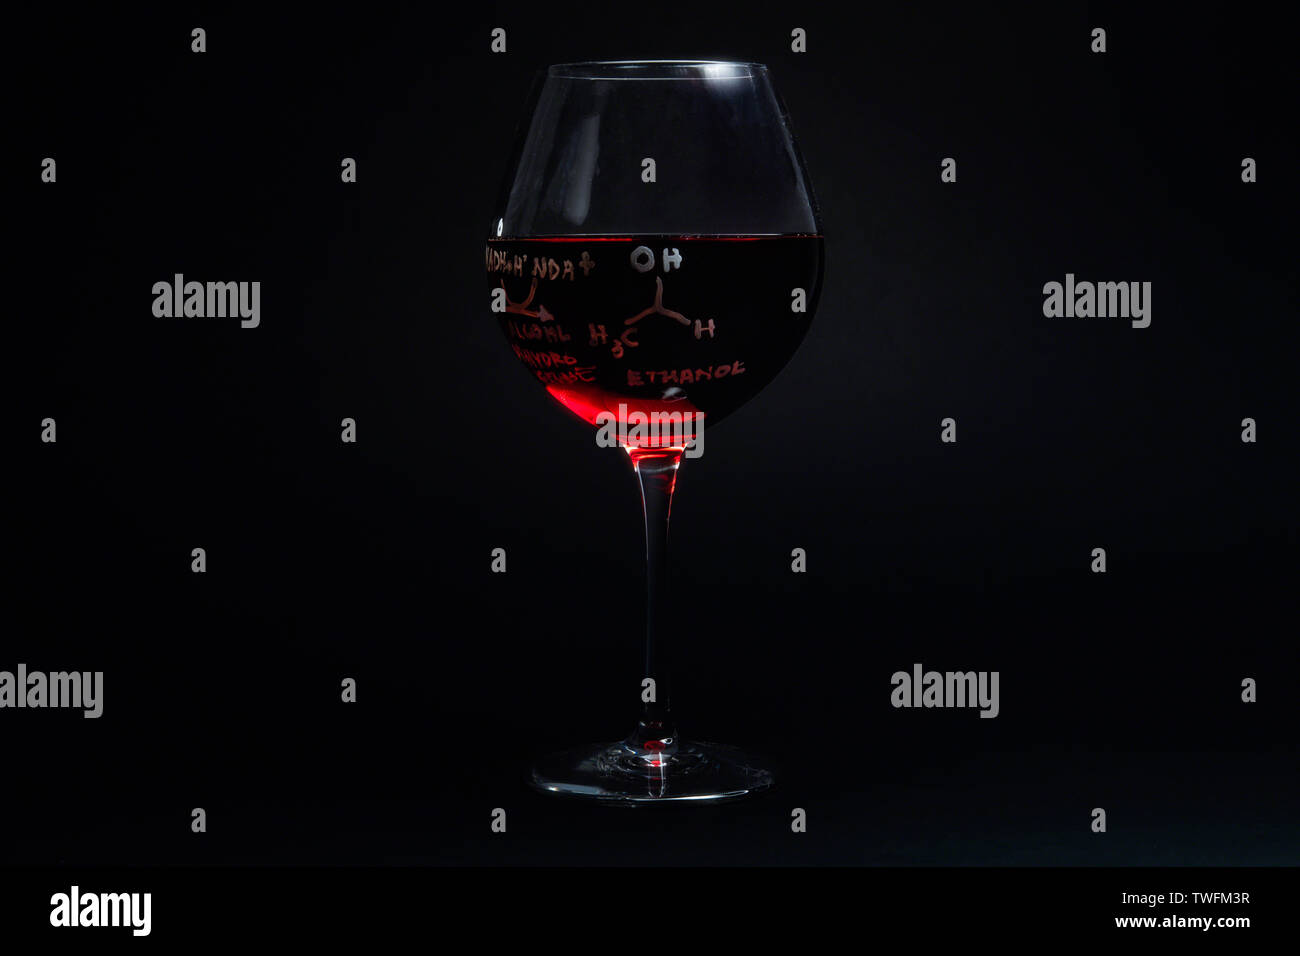 Chemical composition of alcohol on a wine glass Stock Photo